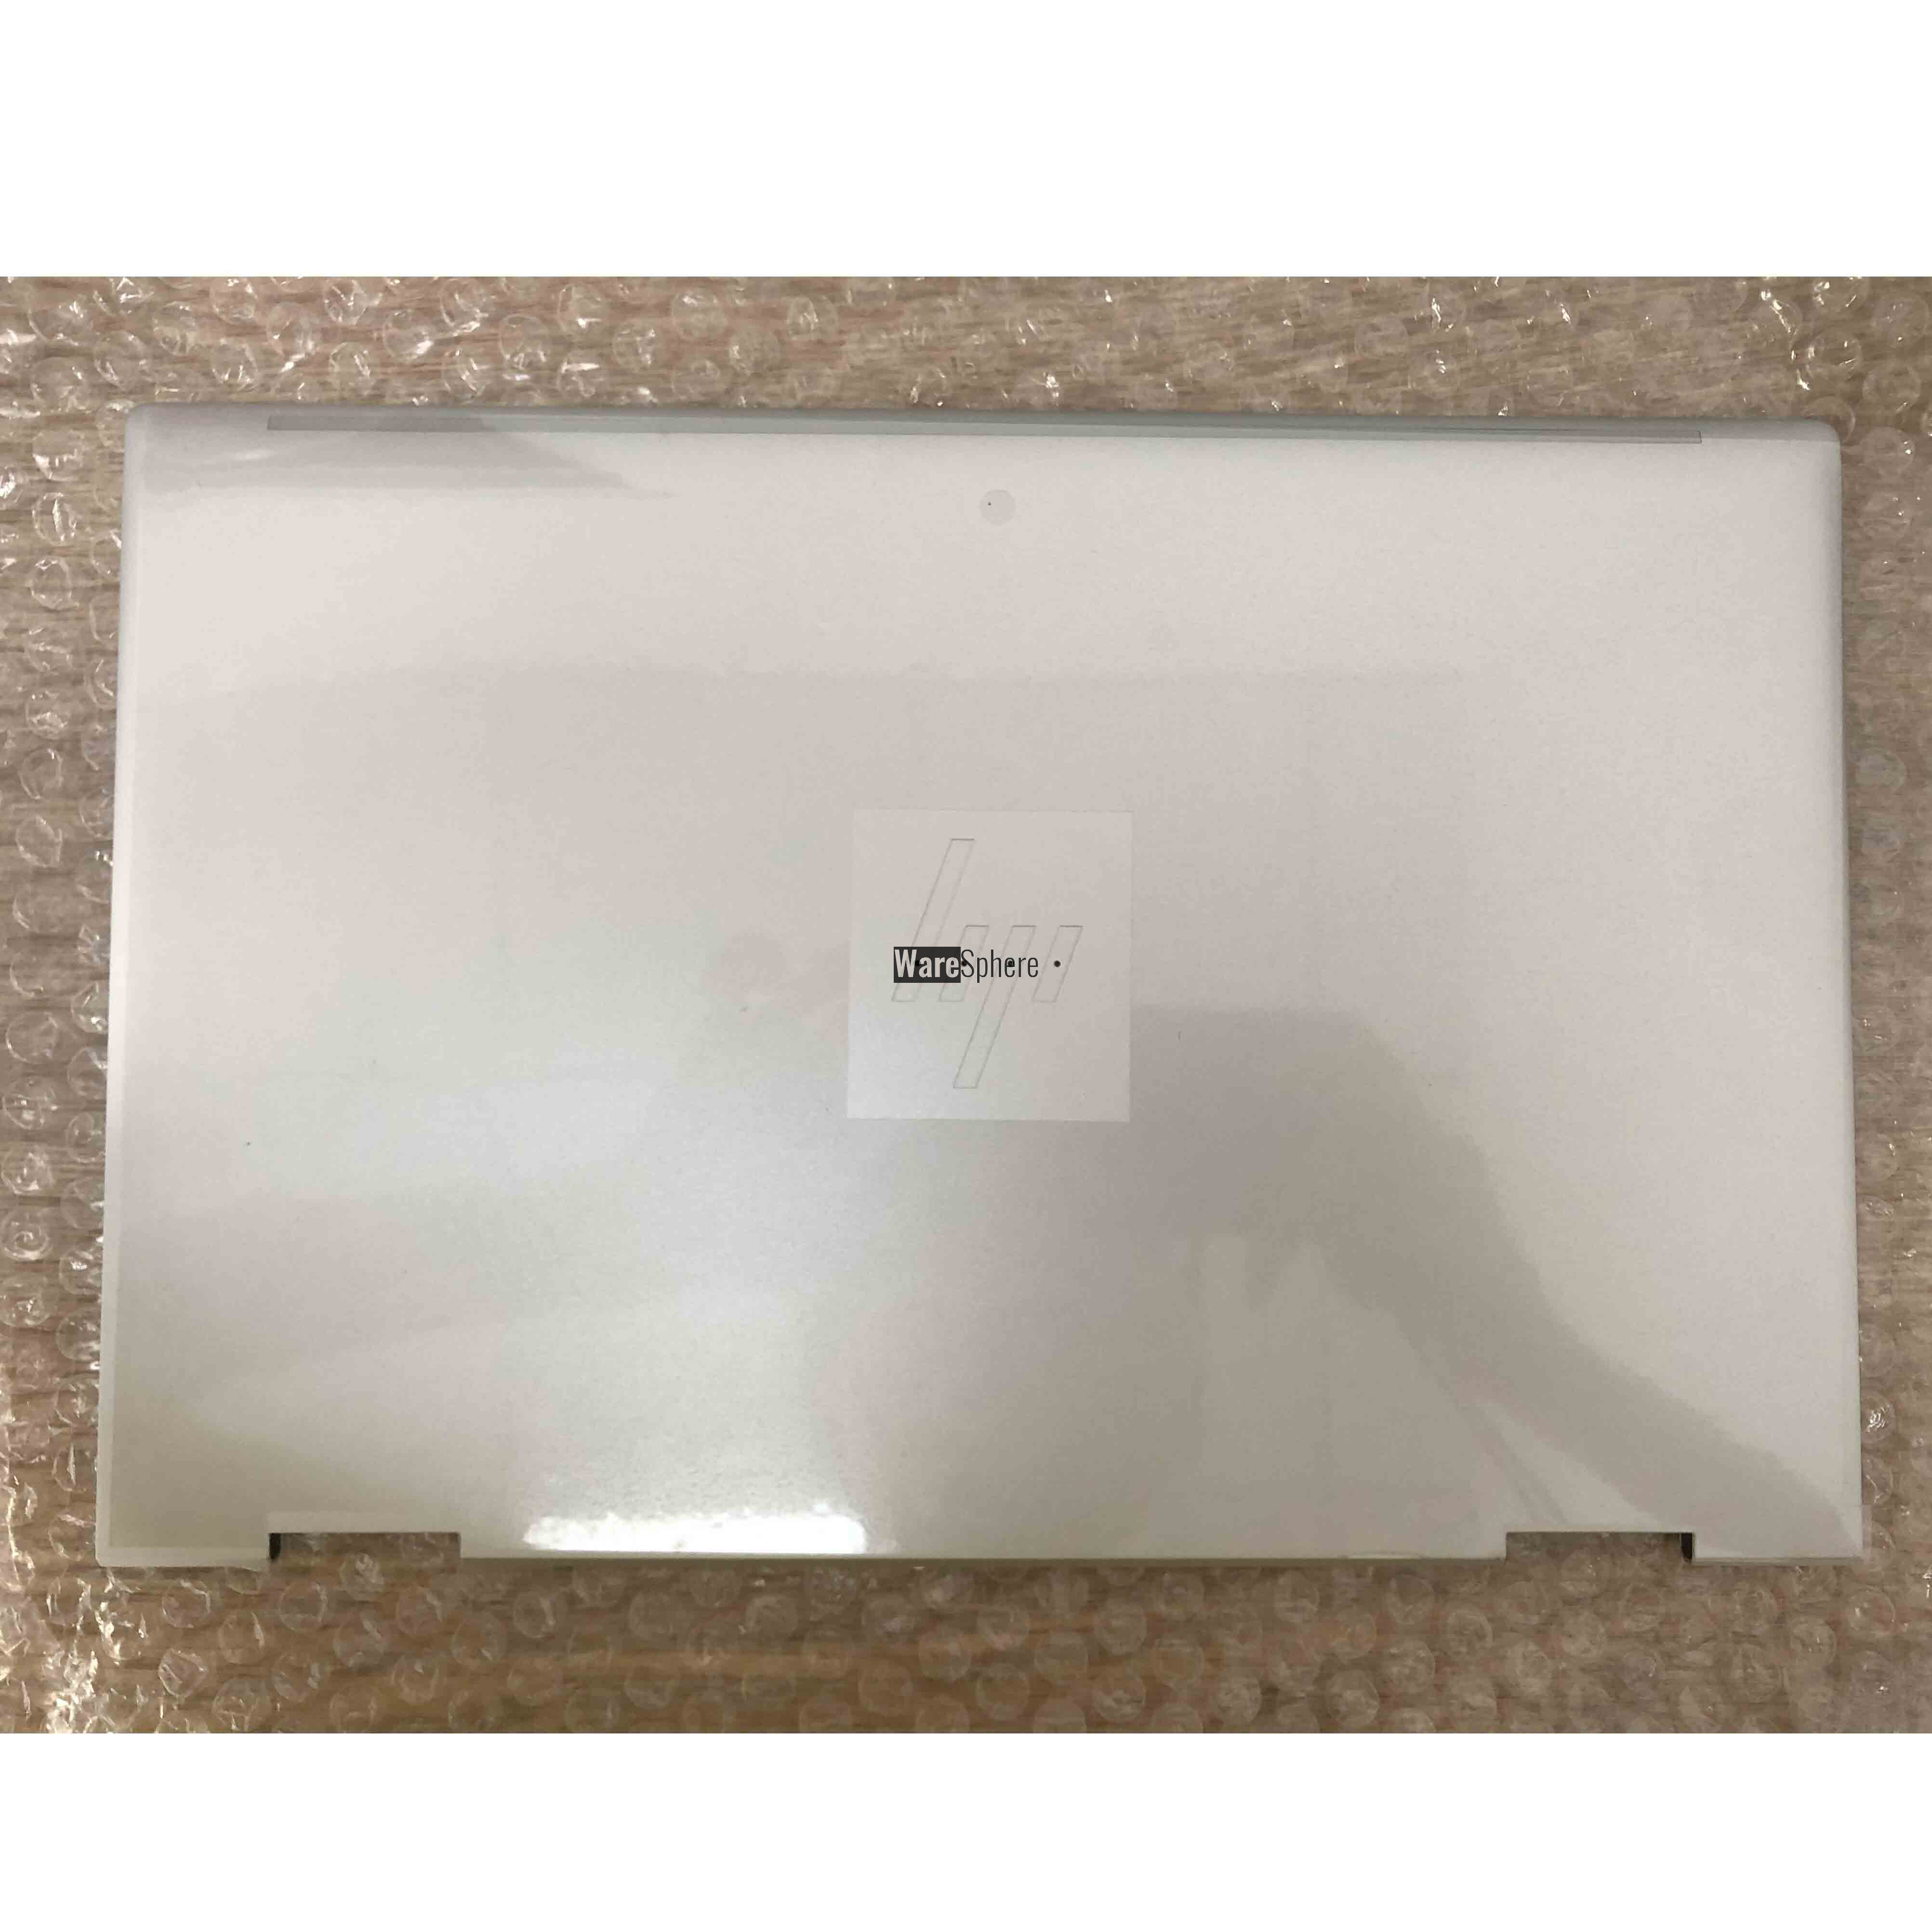 LCD Back Cover for HP EliteBook X360 830 G7 6070B1716201 THICK NAG Silver 